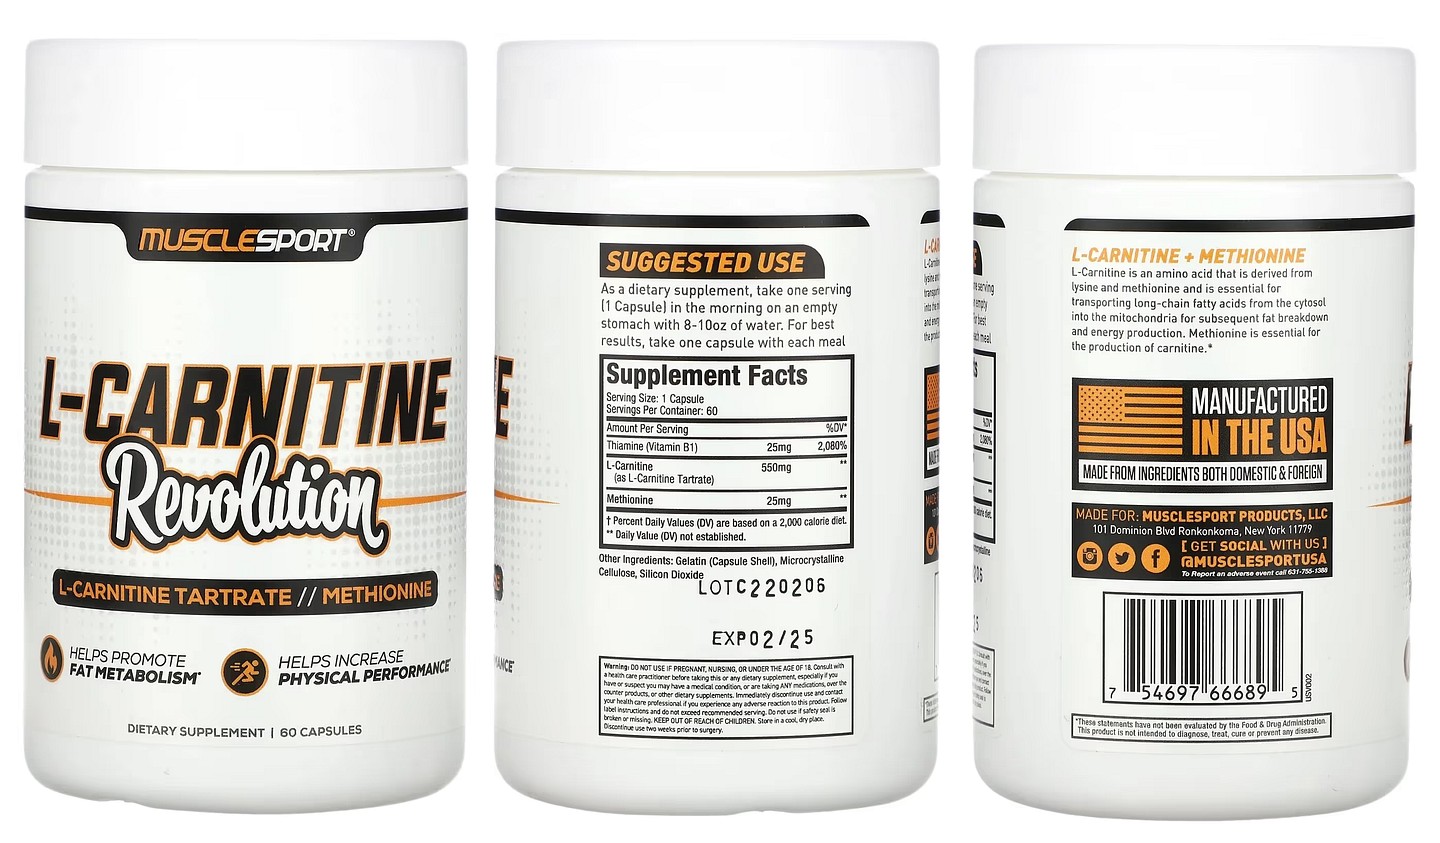 MuscleSport, L-Carnitine packaging